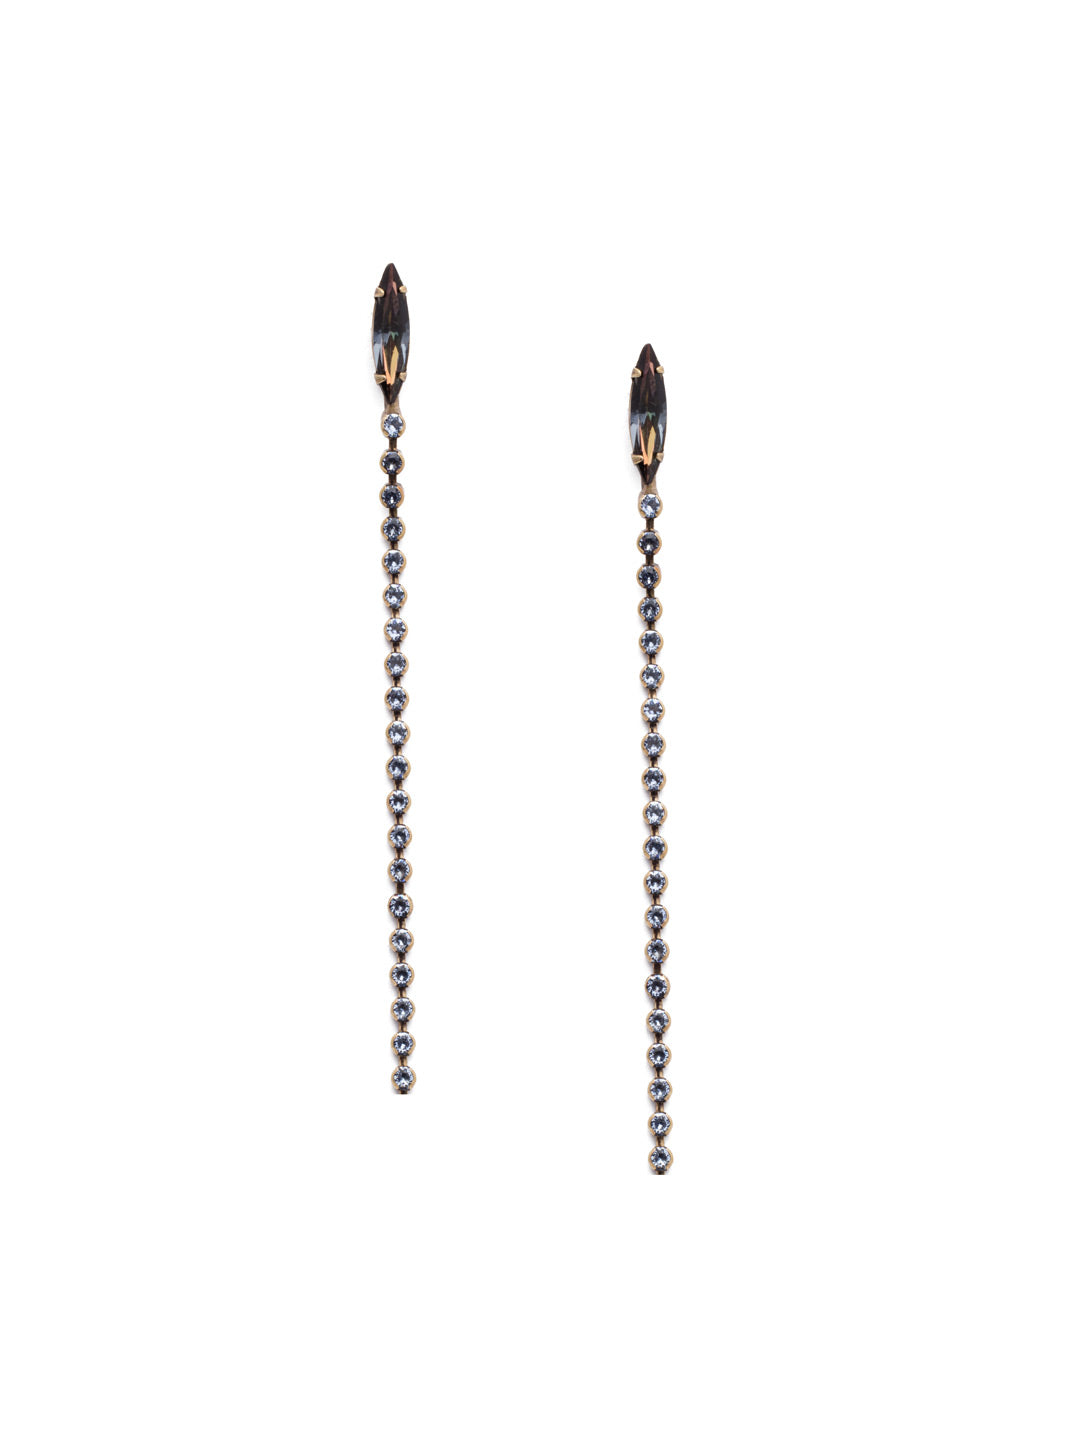 Annatalia Dangle Earrings - EEP10AGSDE - <p>Fasten on the Annatalia Dangle Earring for drama. A dark navette stones drips with a row of round crystals for serious sparkle. From Sorrelli's Selvedge Denim collection in our Antique Gold-tone finish.</p>